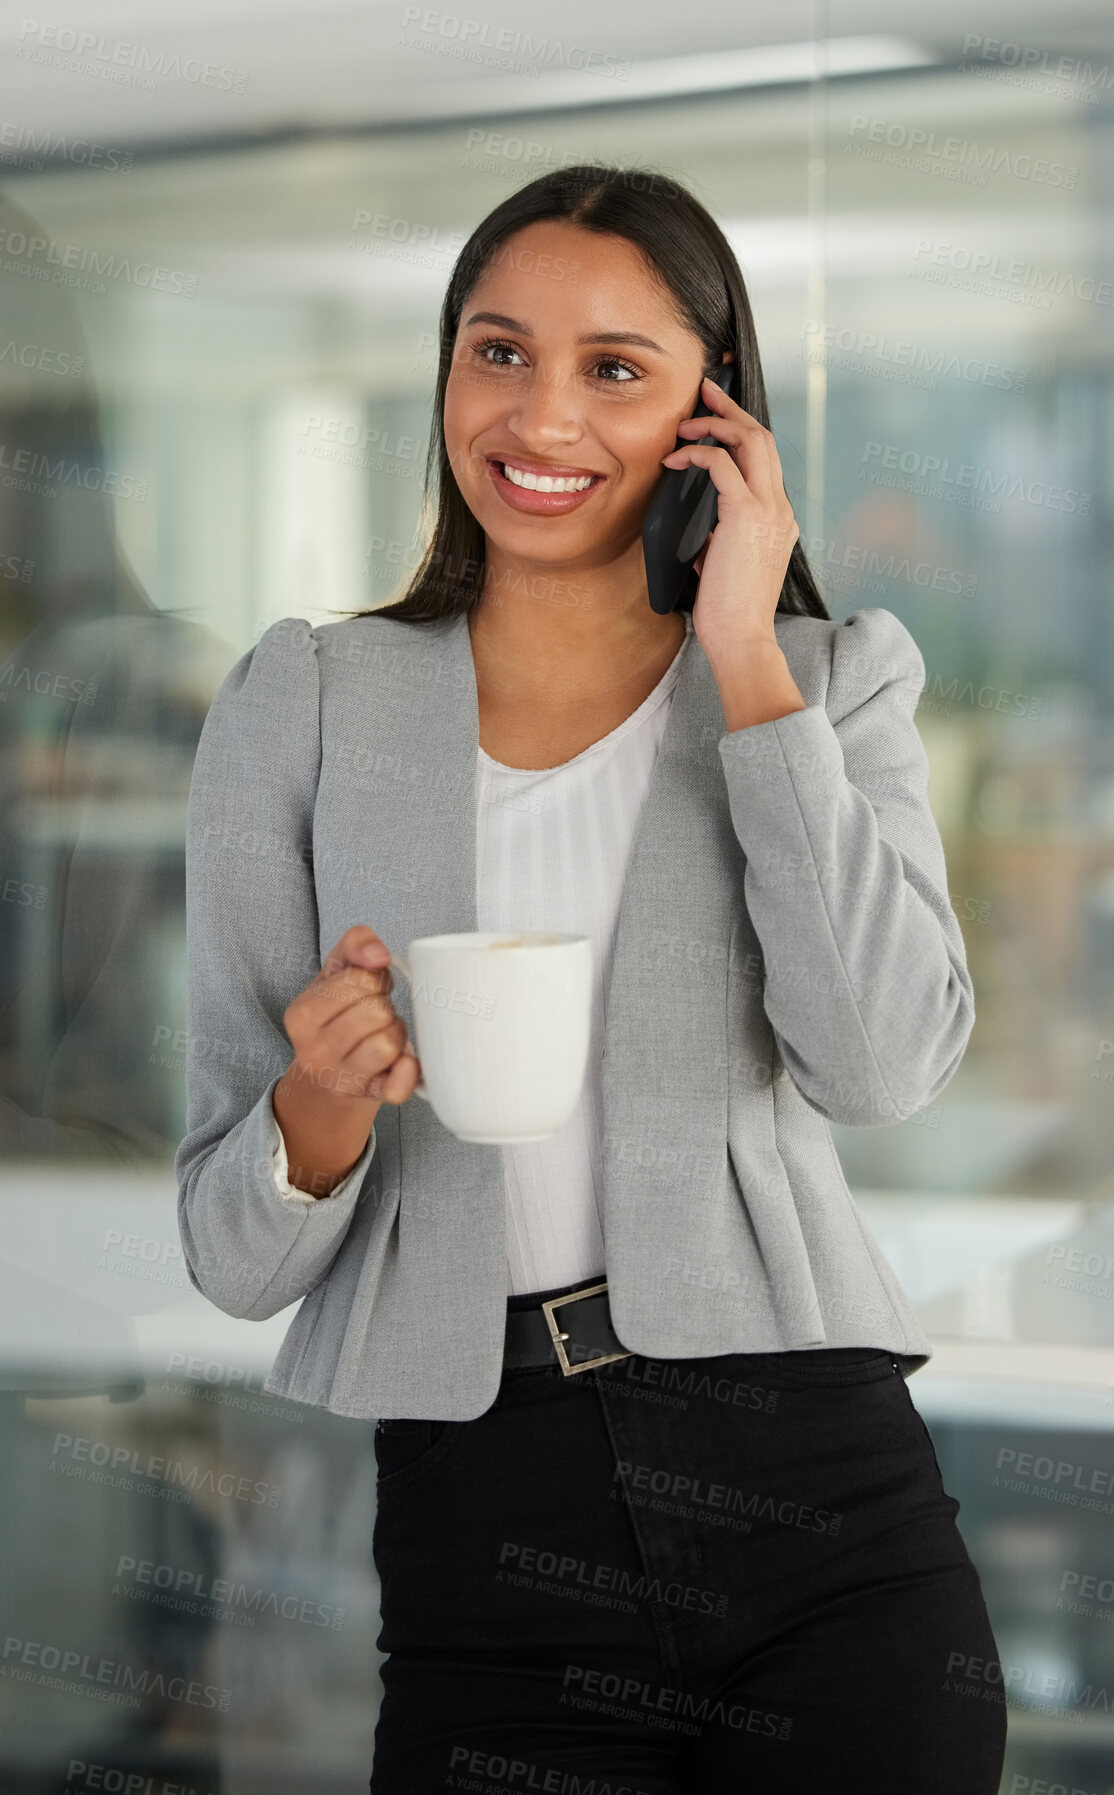 Buy stock photo Shot of a young businesswoman using a smartphone and having coffee in a modern office